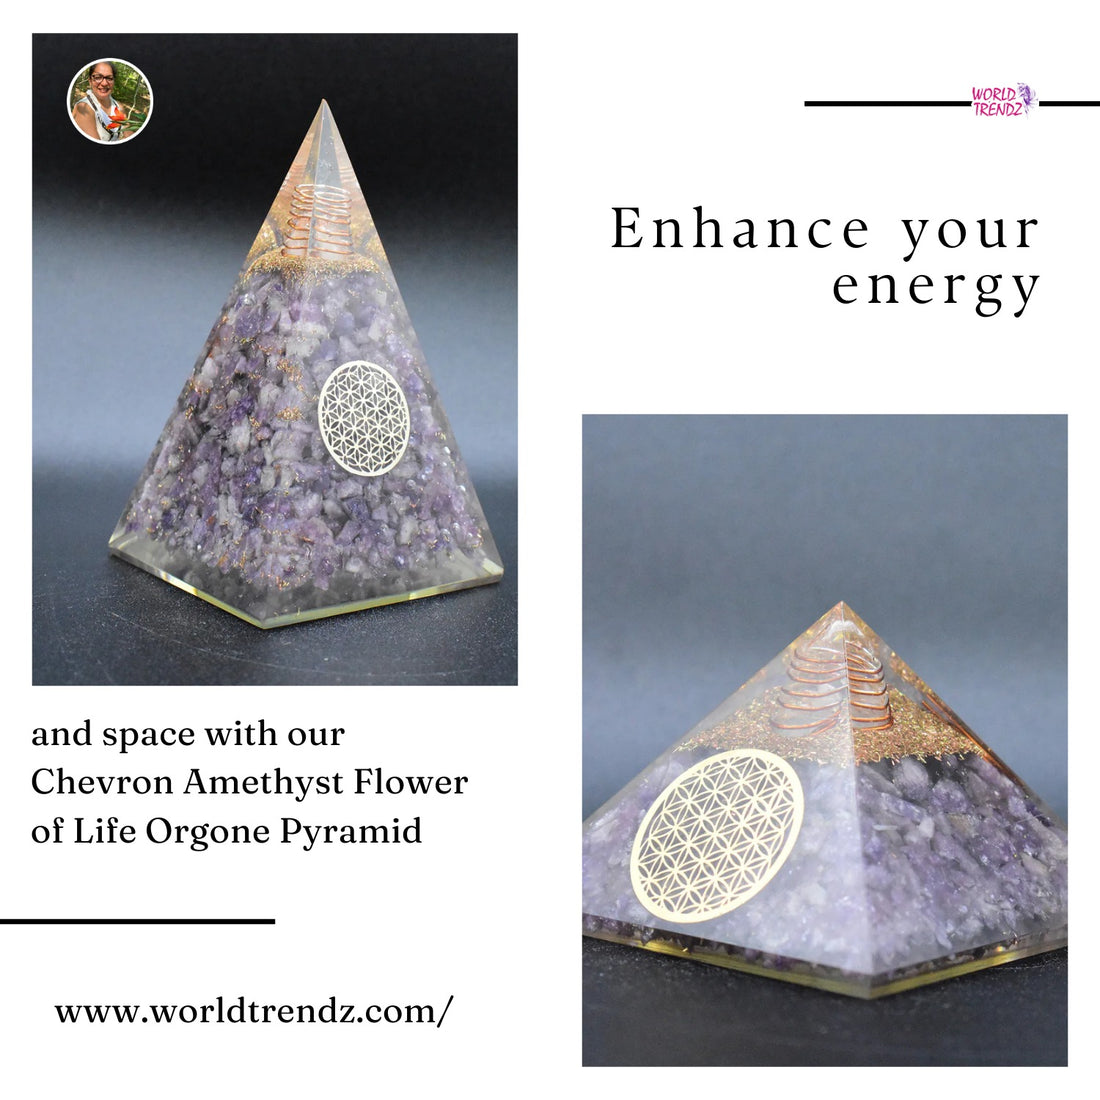 Why Chevron Amethyst Flower of Life Orgone Pyramid Should Be Your Next Spiritual Investment